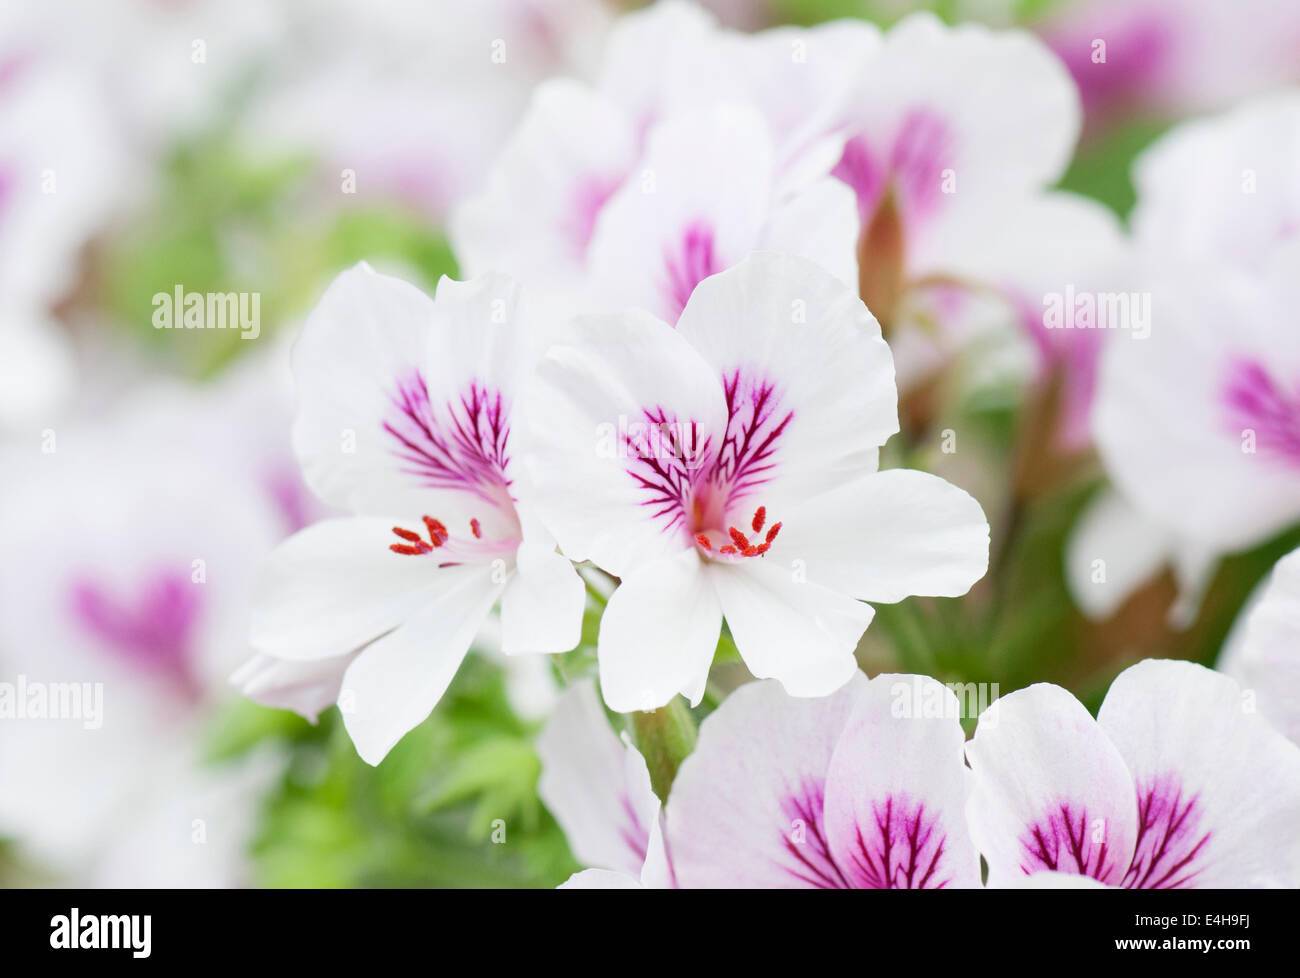 Geranium 'Imperial butterfly', Pelargonium 'Imperial butterfly'. Stock Photo